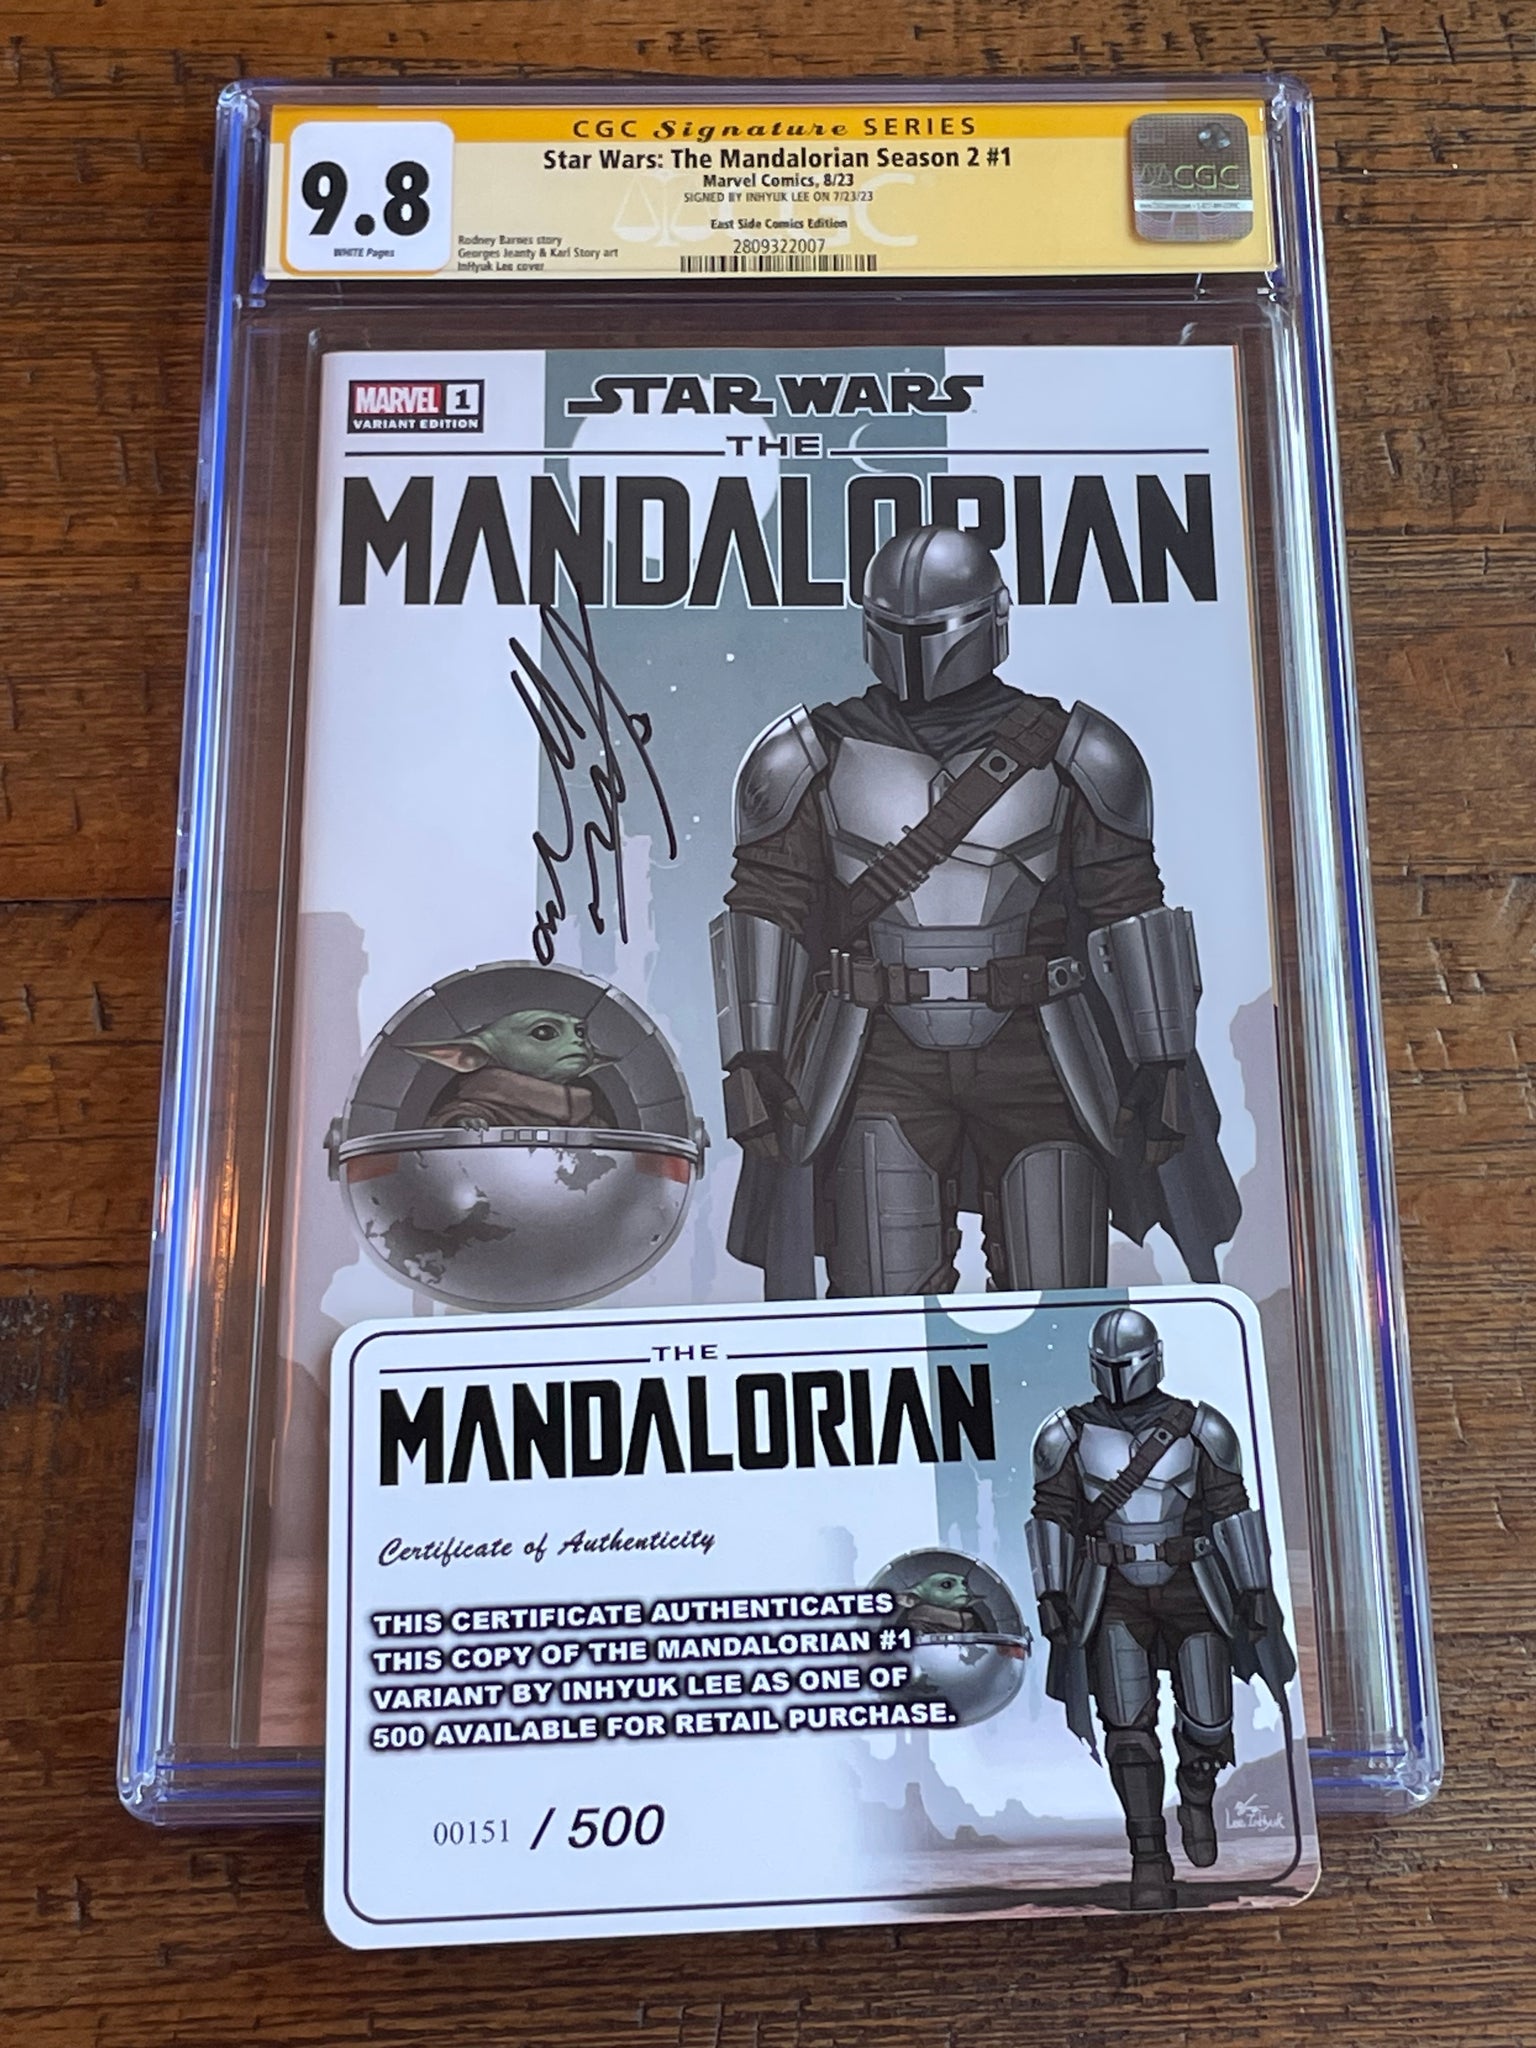 STAR WARS THE MANDALORIAN SEASON-2 #1 CGC SS 9.8 INHYUK LEE SIGNED EXCL VARIANT LIMITED to 500